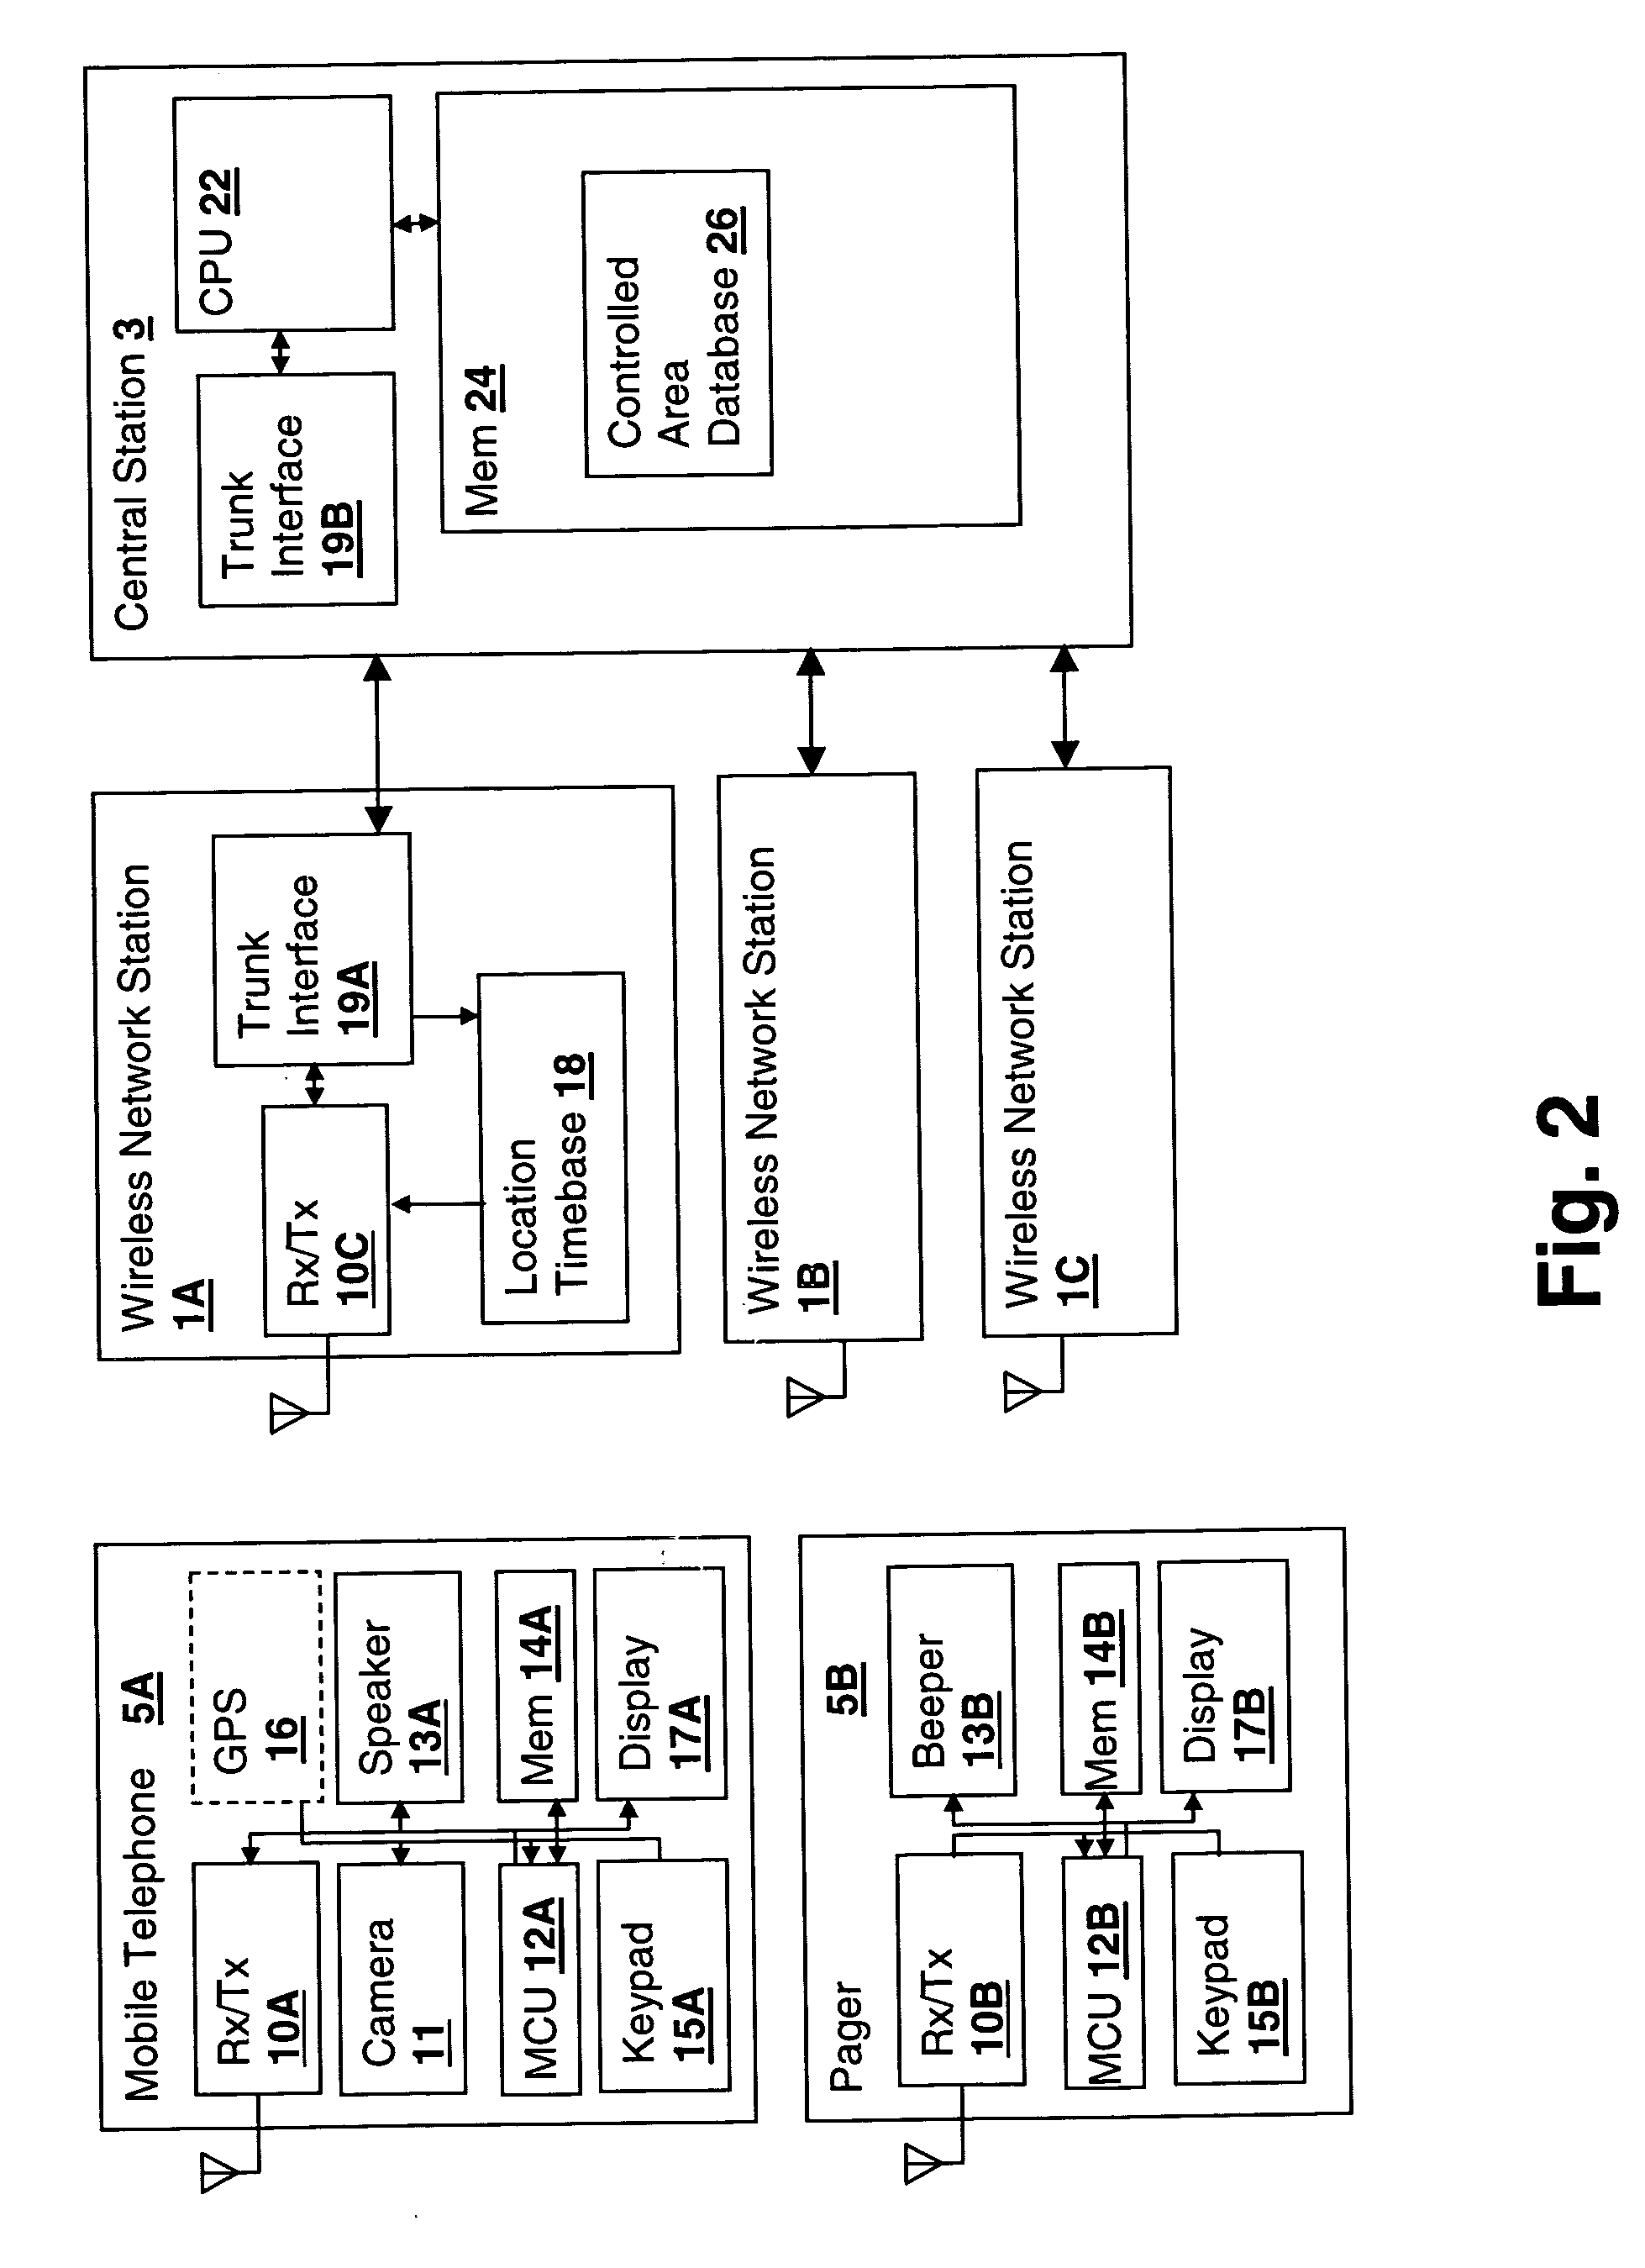 Location-based control of wireless communications device features